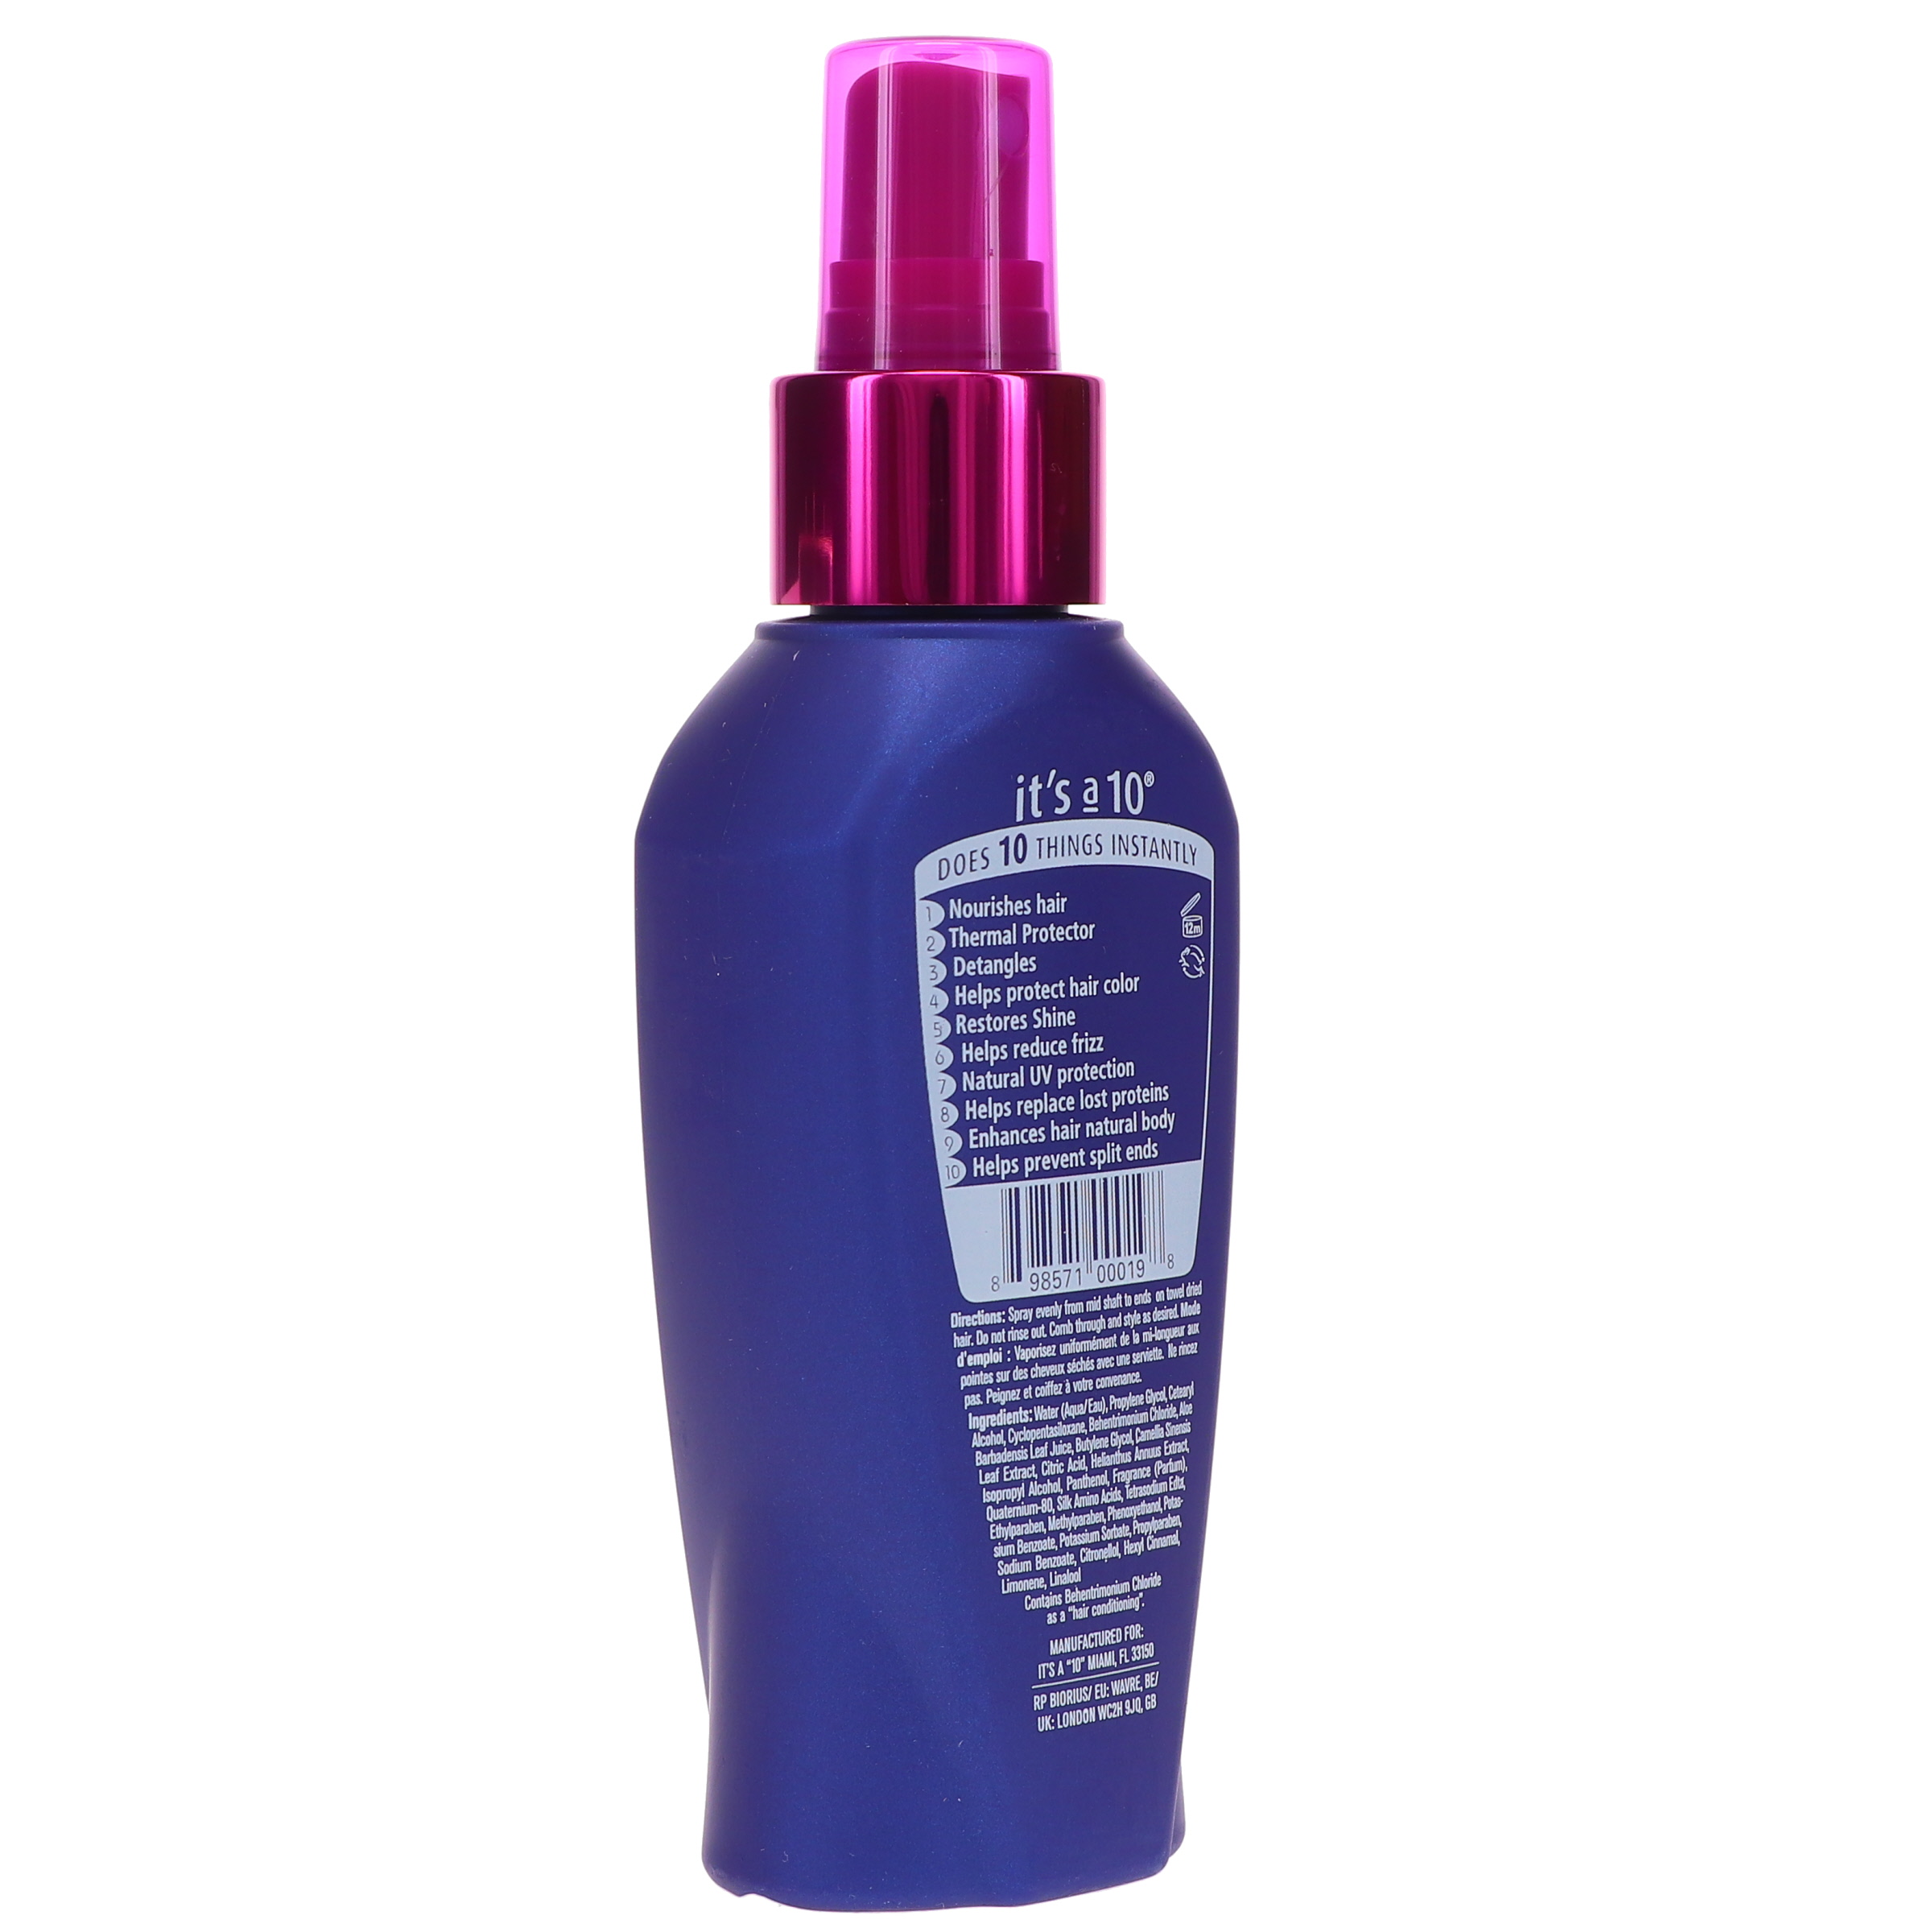 It's a 10 Miracle Leave-in Product 4 oz - image 4 of 8